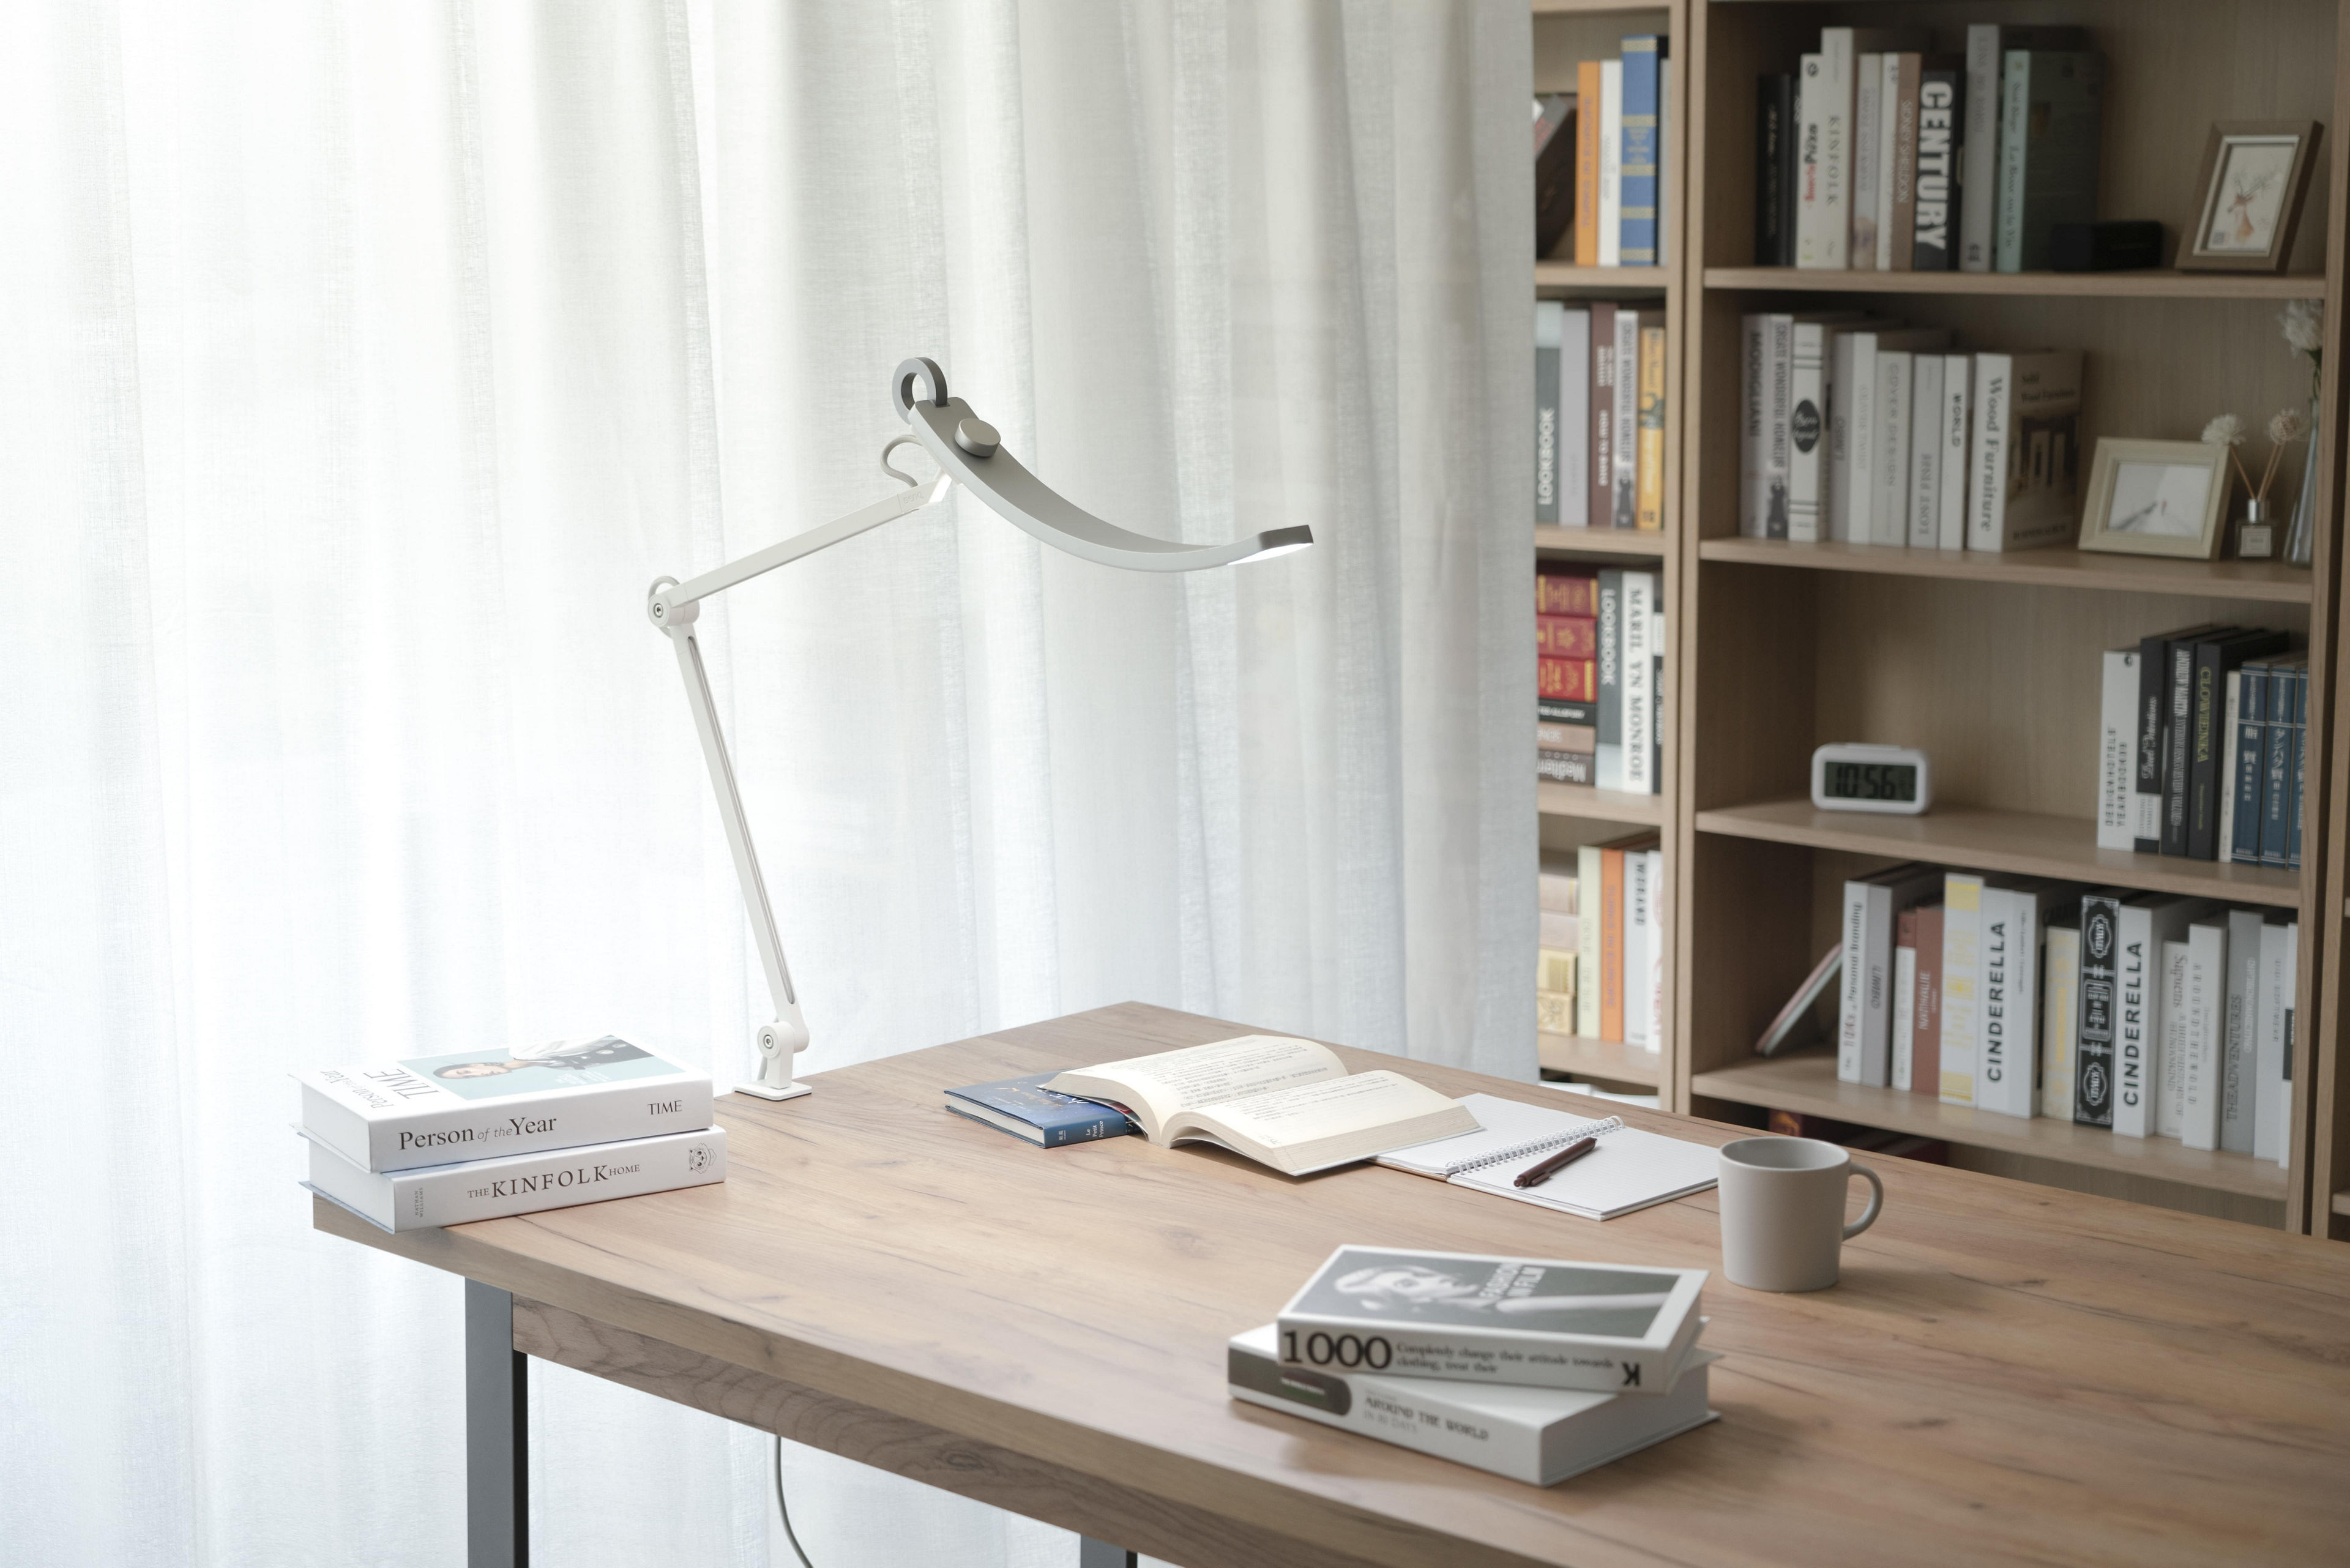 How Many Lumens for a Desk Lamp: Is 500 Lumens Good Enough for Reading?